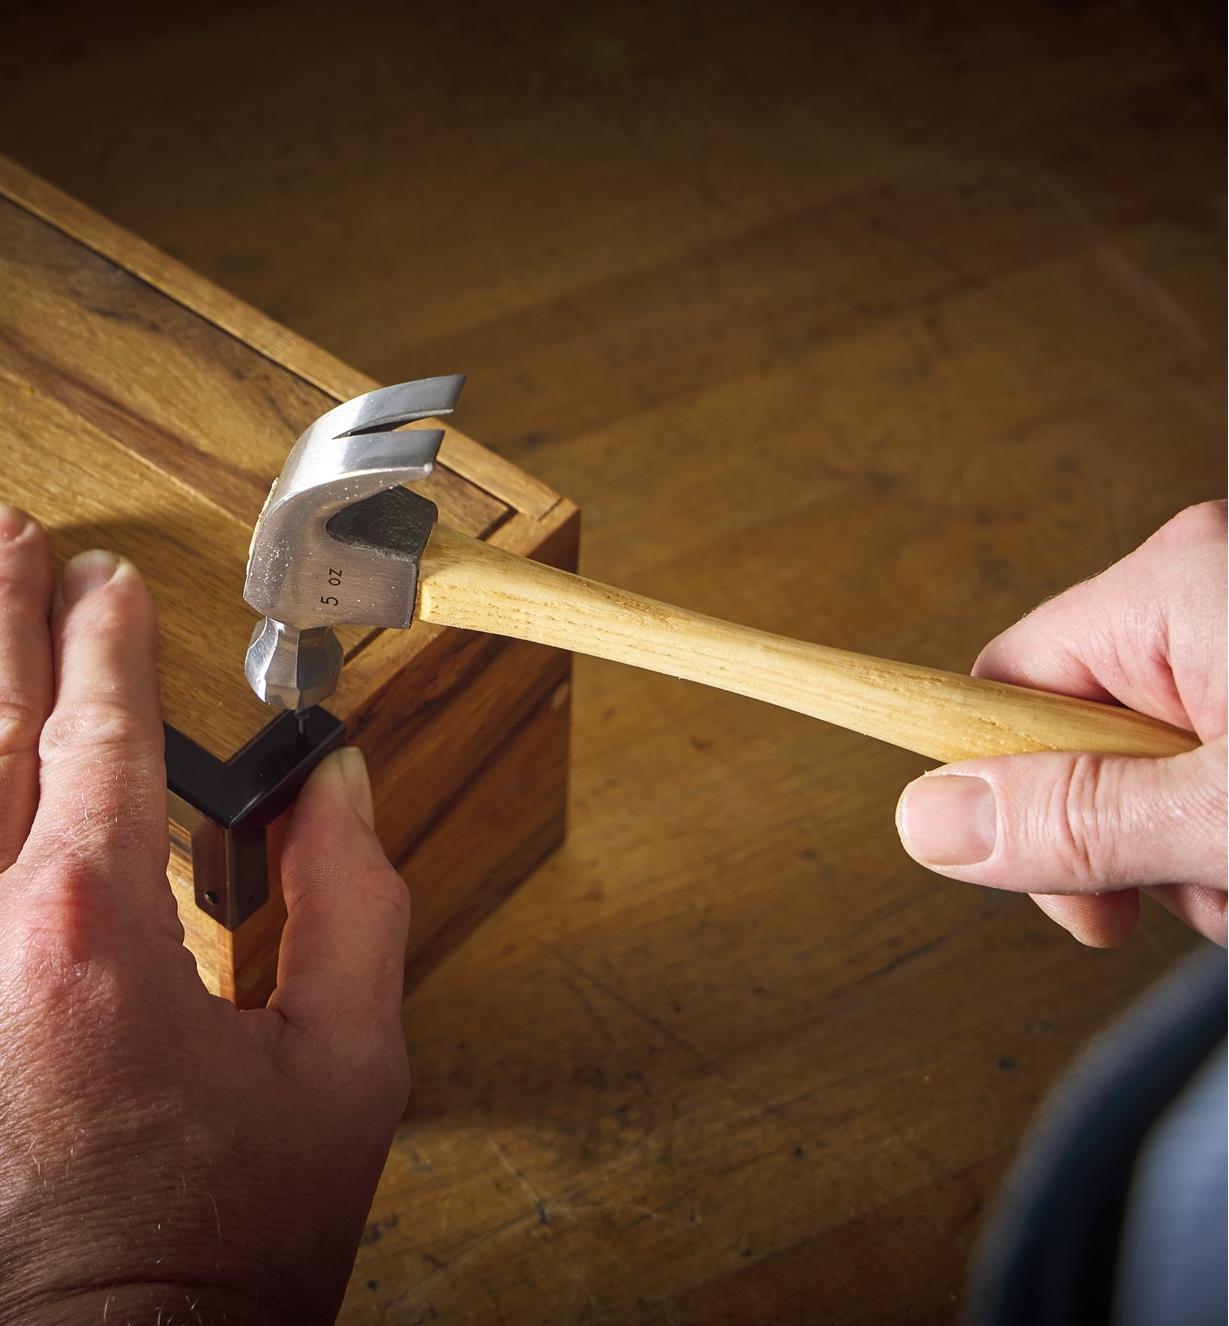 Holding a wooden box steady as a hammer drives a small nail to attach a box corner